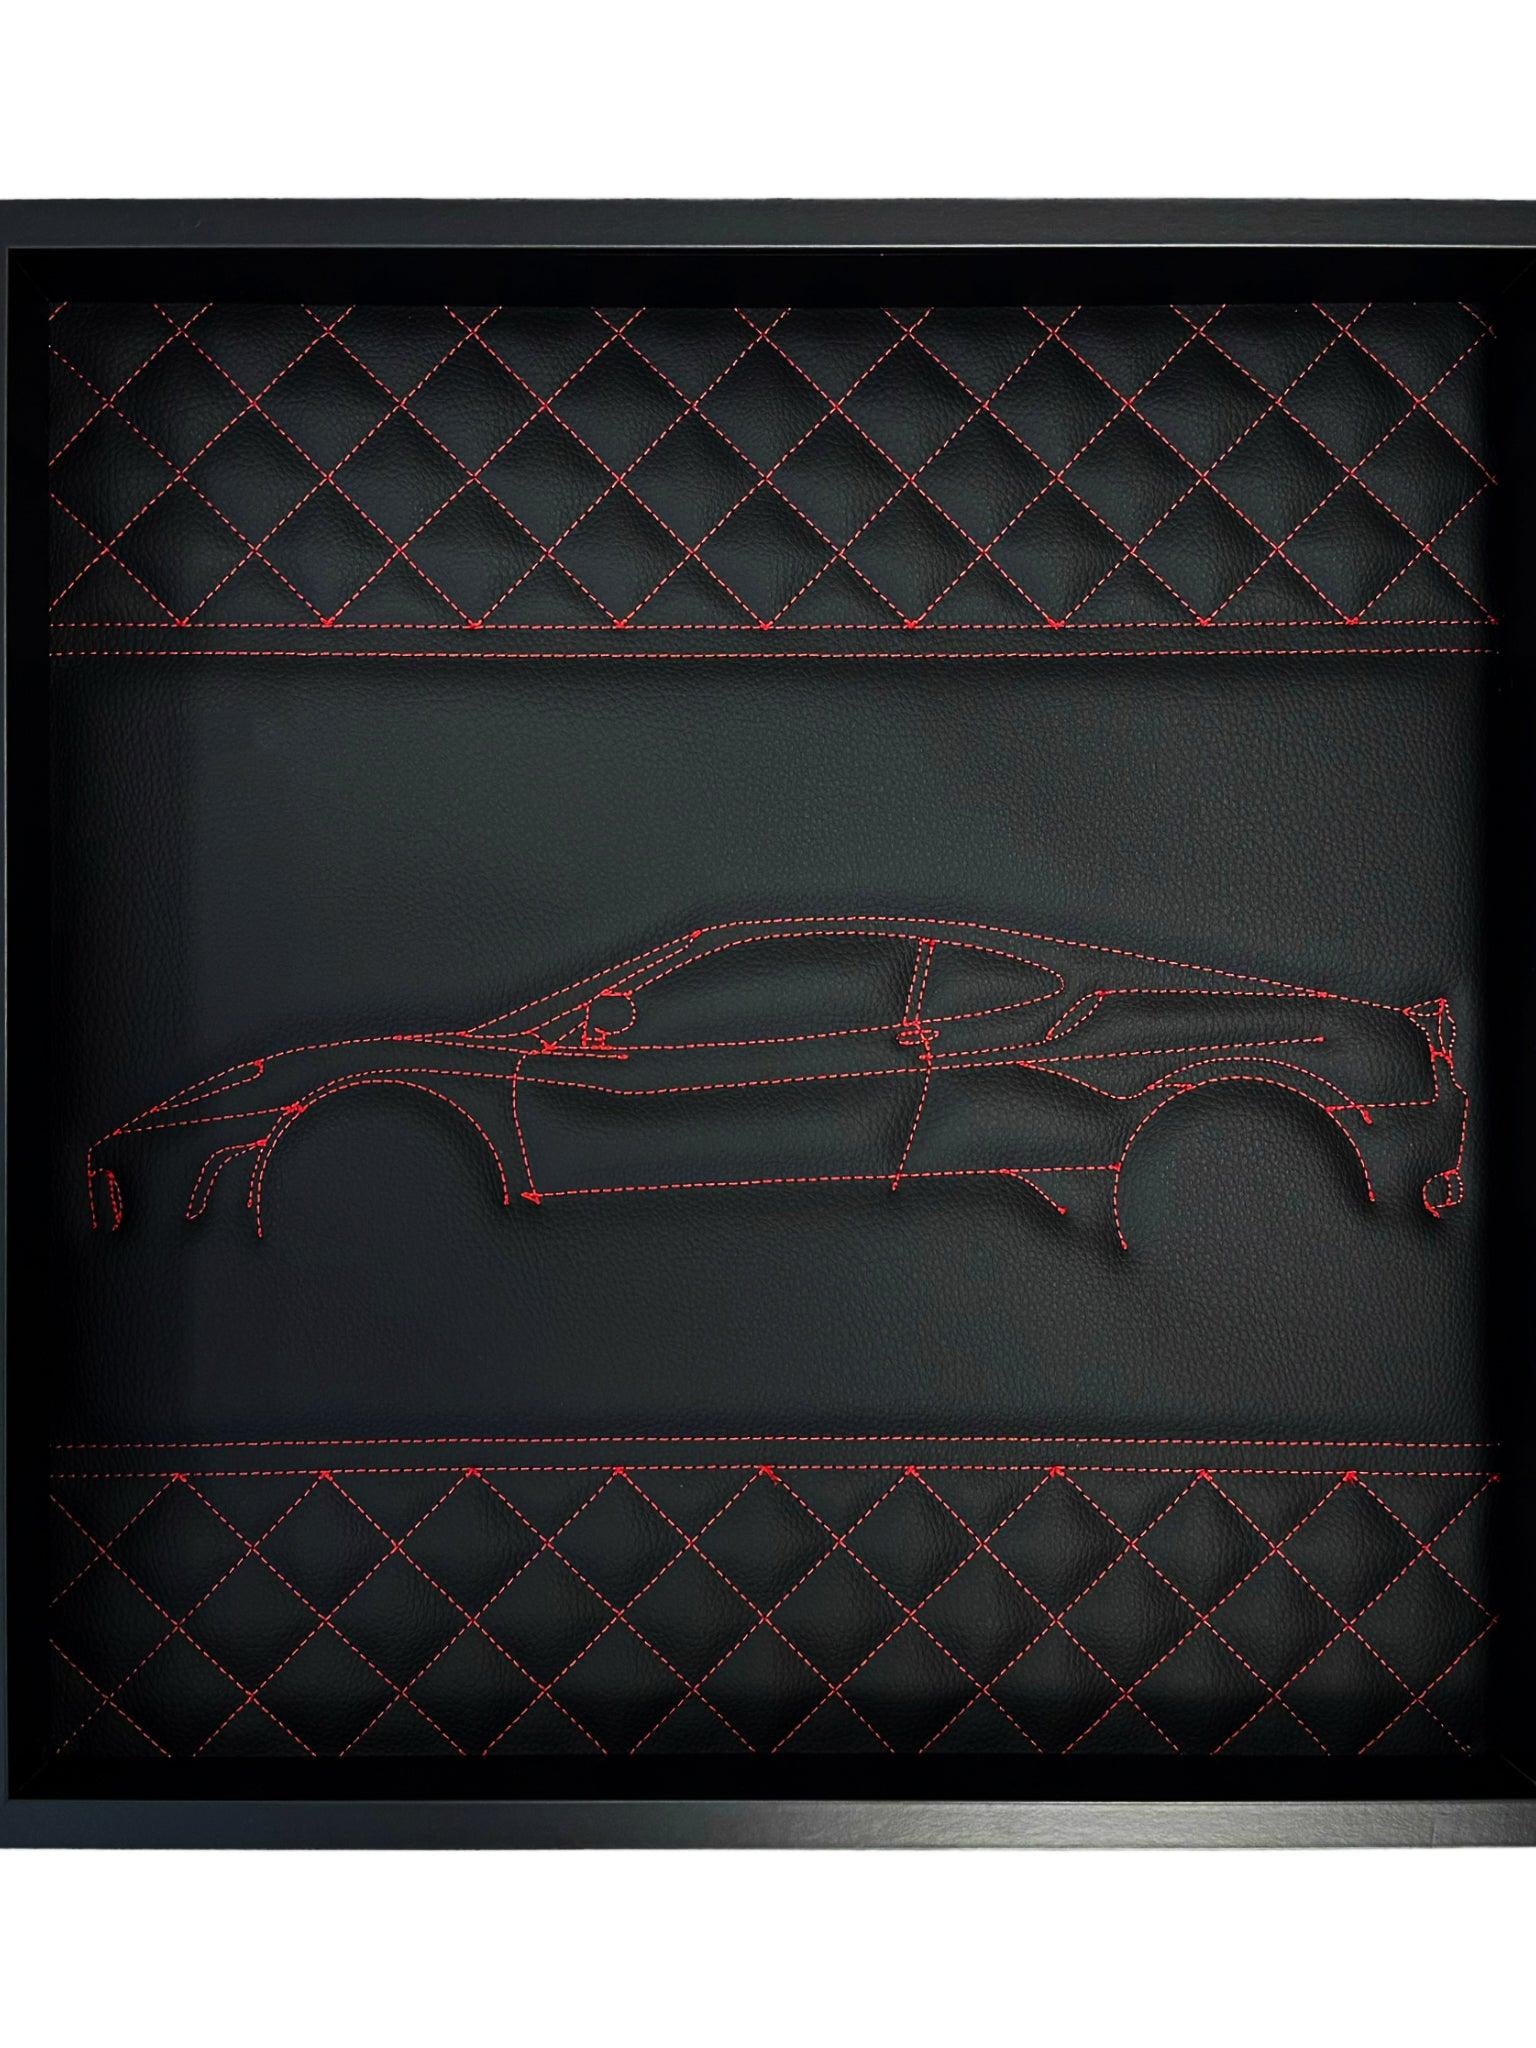 Black Leather Ferrari F430 Inspired Wall Art: Embroidered Red Stitch Luxury Decor